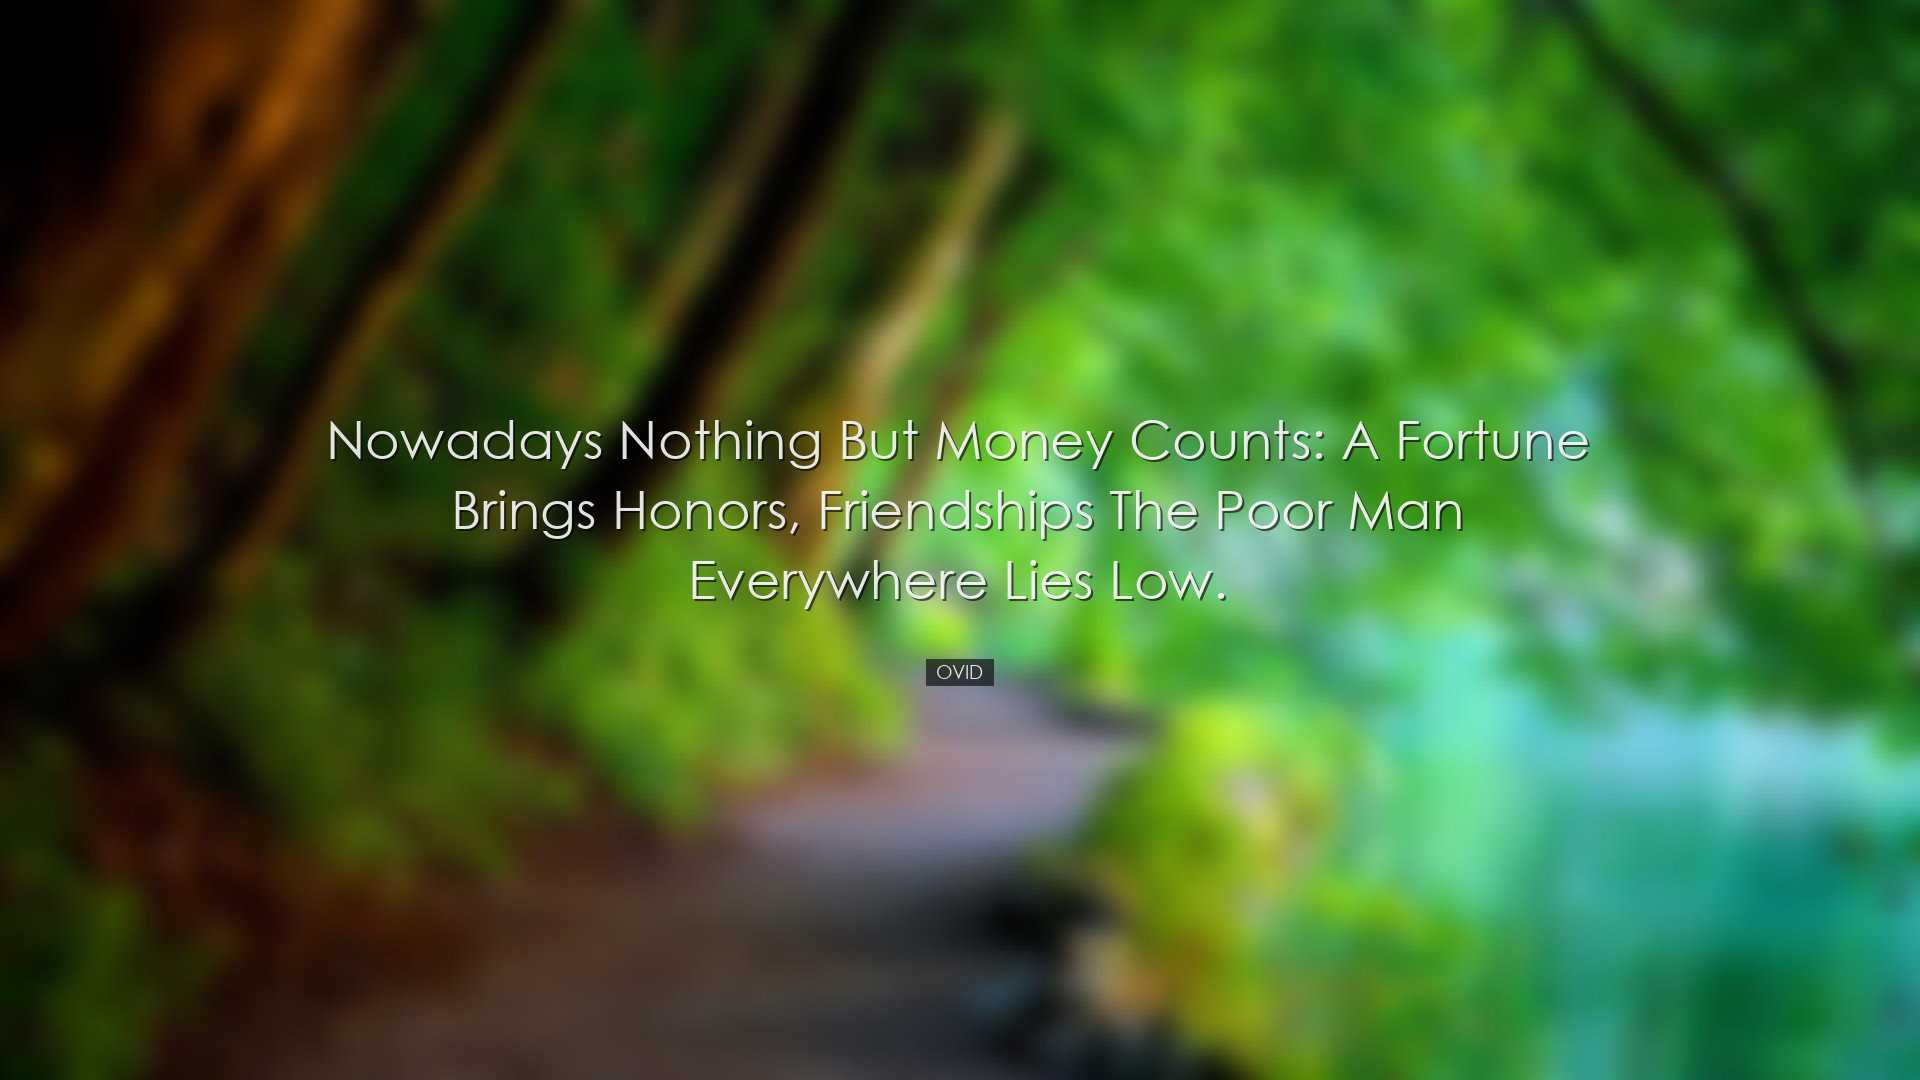 Nowadays nothing but money counts: a fortune brings honors, friend